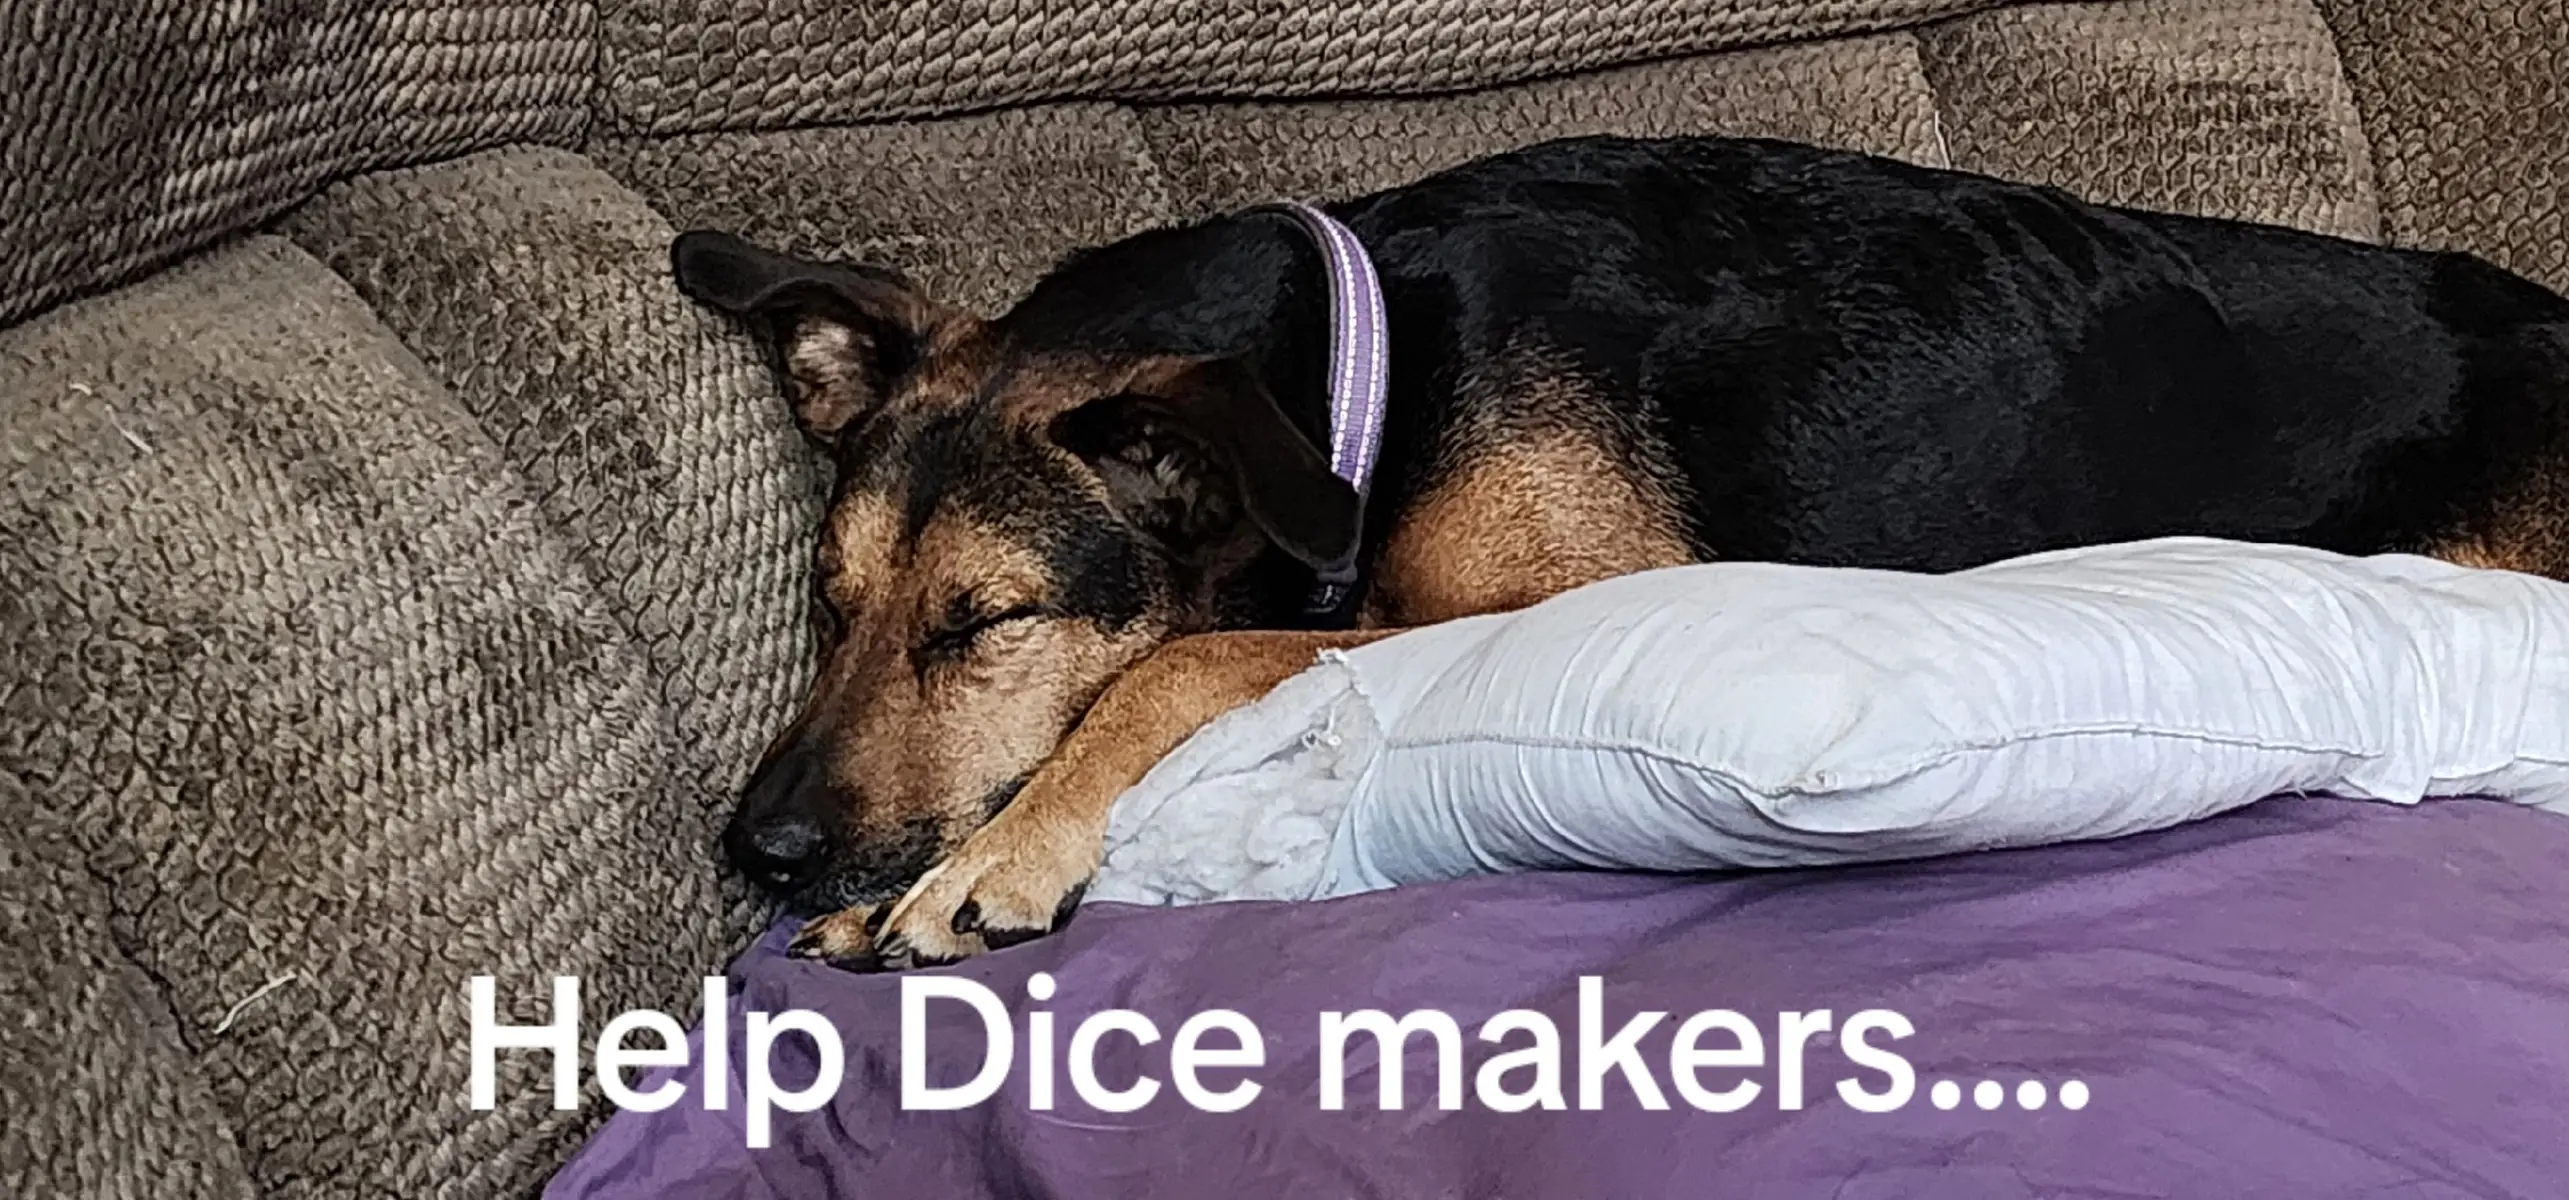 please # or @ Dice makers i can contact about getting memorial custom dice created.  I cut some fur clippings, that I can ship.  Thank you for your care and concern and any help in this matter. We miss her so much. I don't have a lot of funds after the medical costs but I can offer 3d sculpting services and files as well as some funds. thanks. . . . #rainbowbridge ##customdice #dndice #d20 